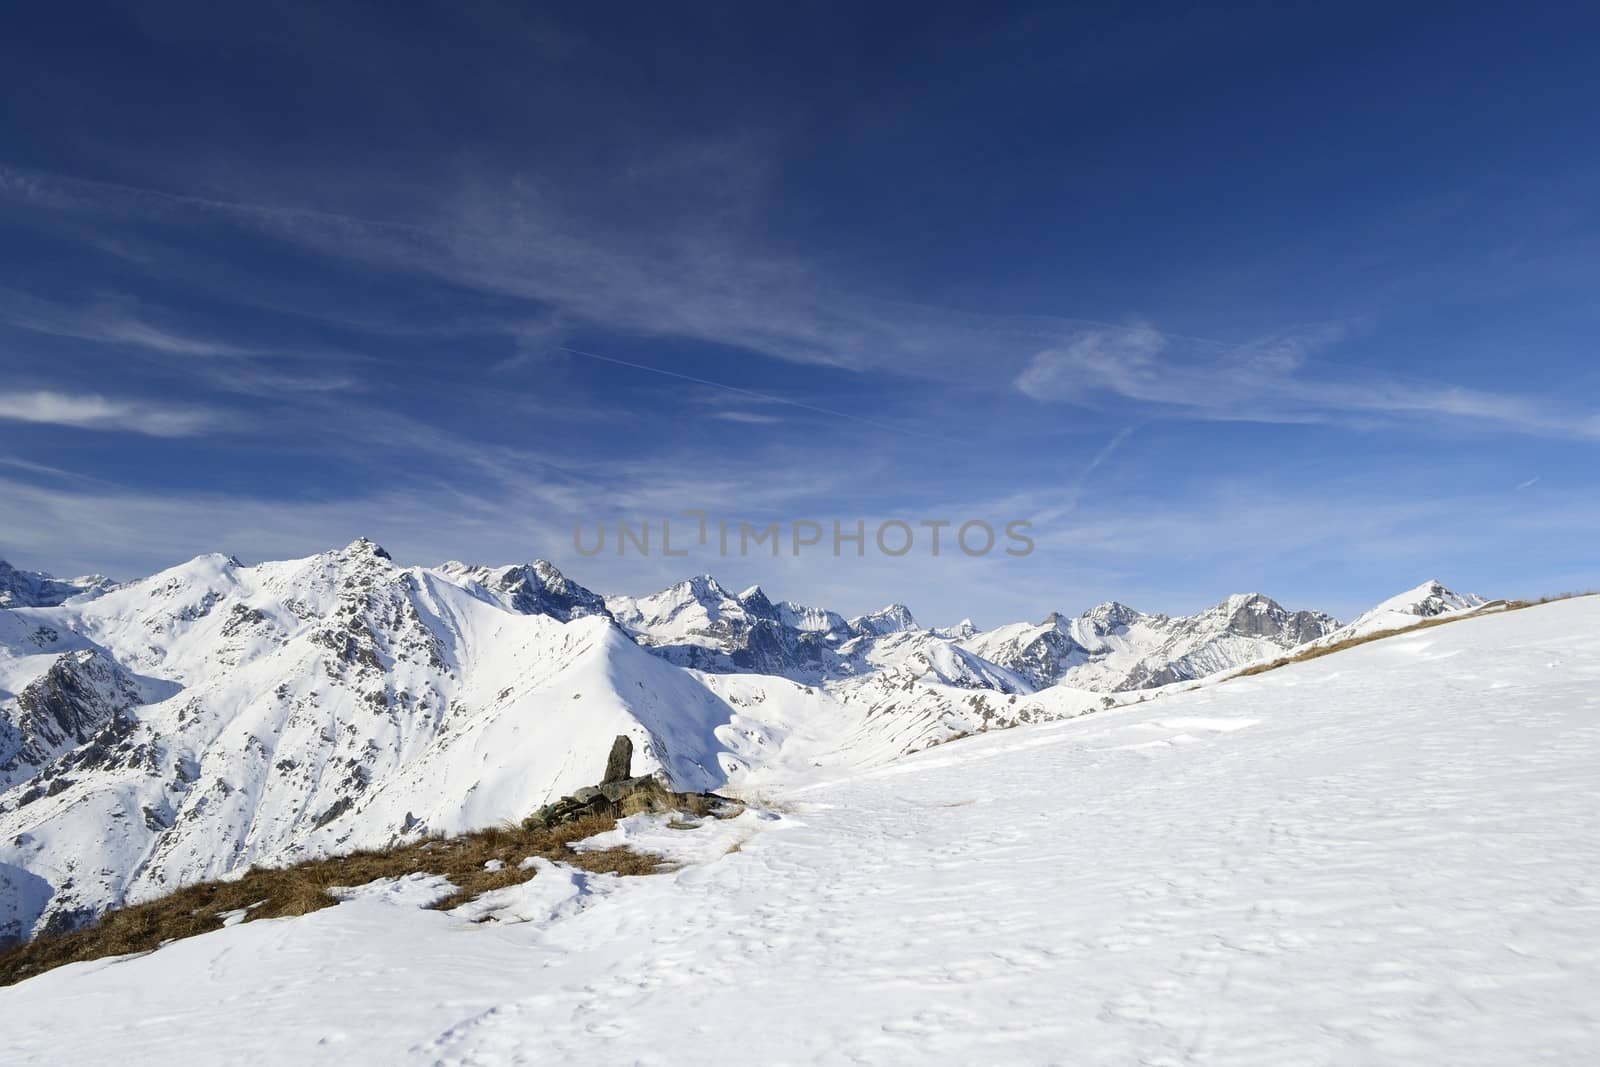 Candid off-piste ski slope in scenic background of mountain peaks, valleys and plain. Piedmont, Italian Alps